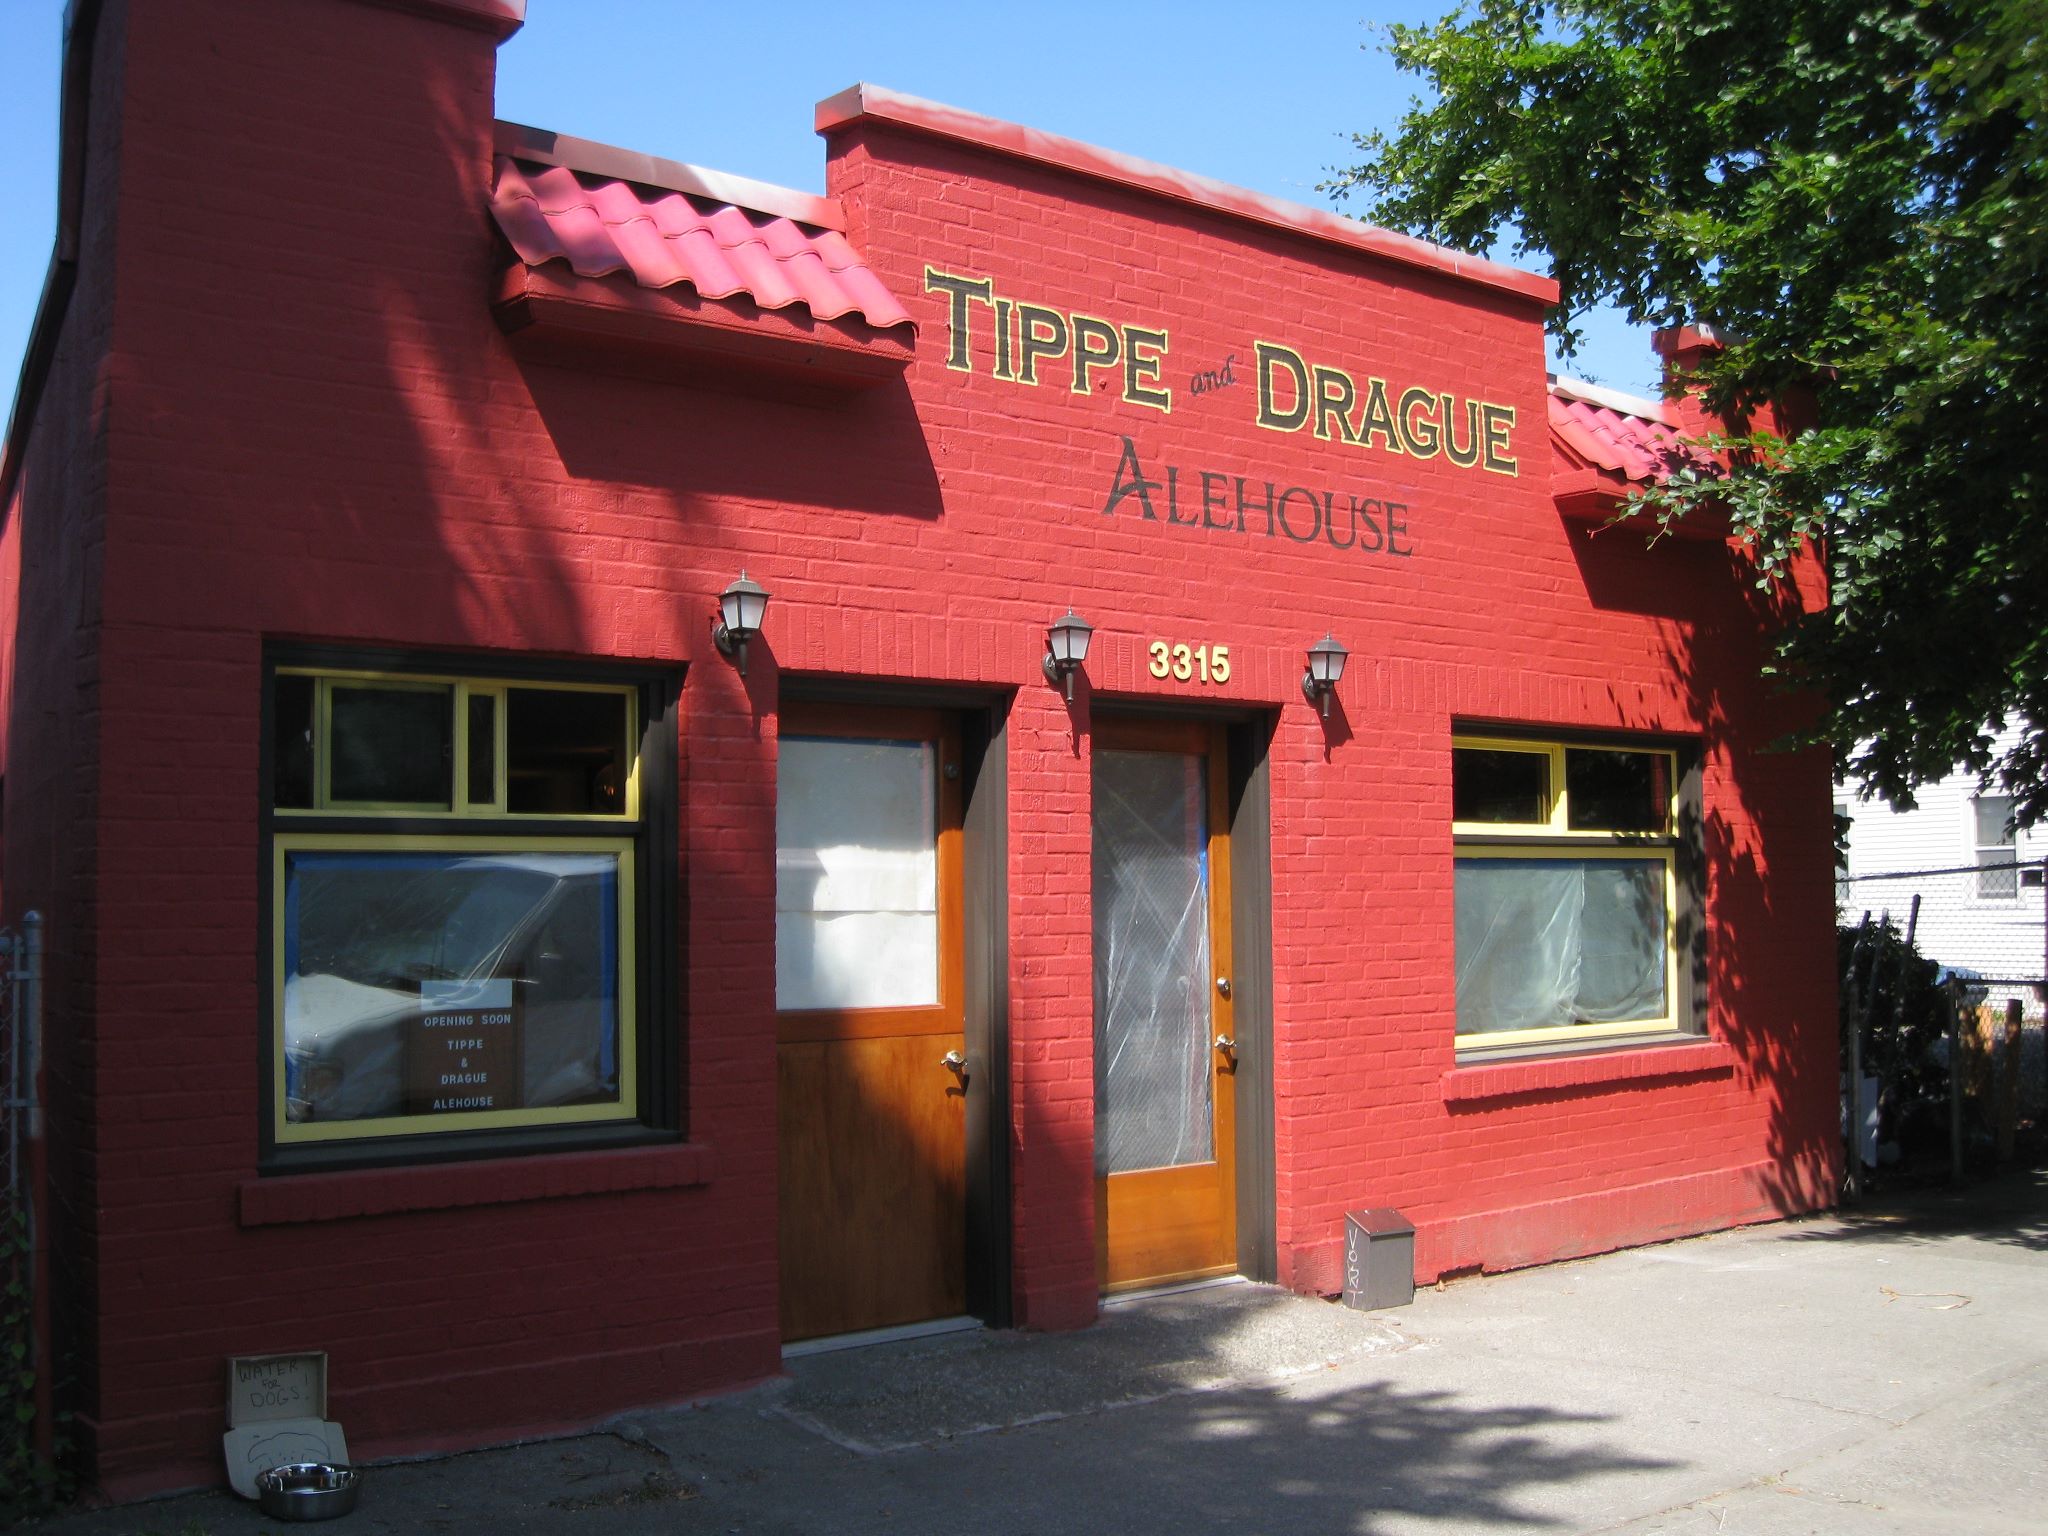 Business logo of Tippe and Drague Alehouse